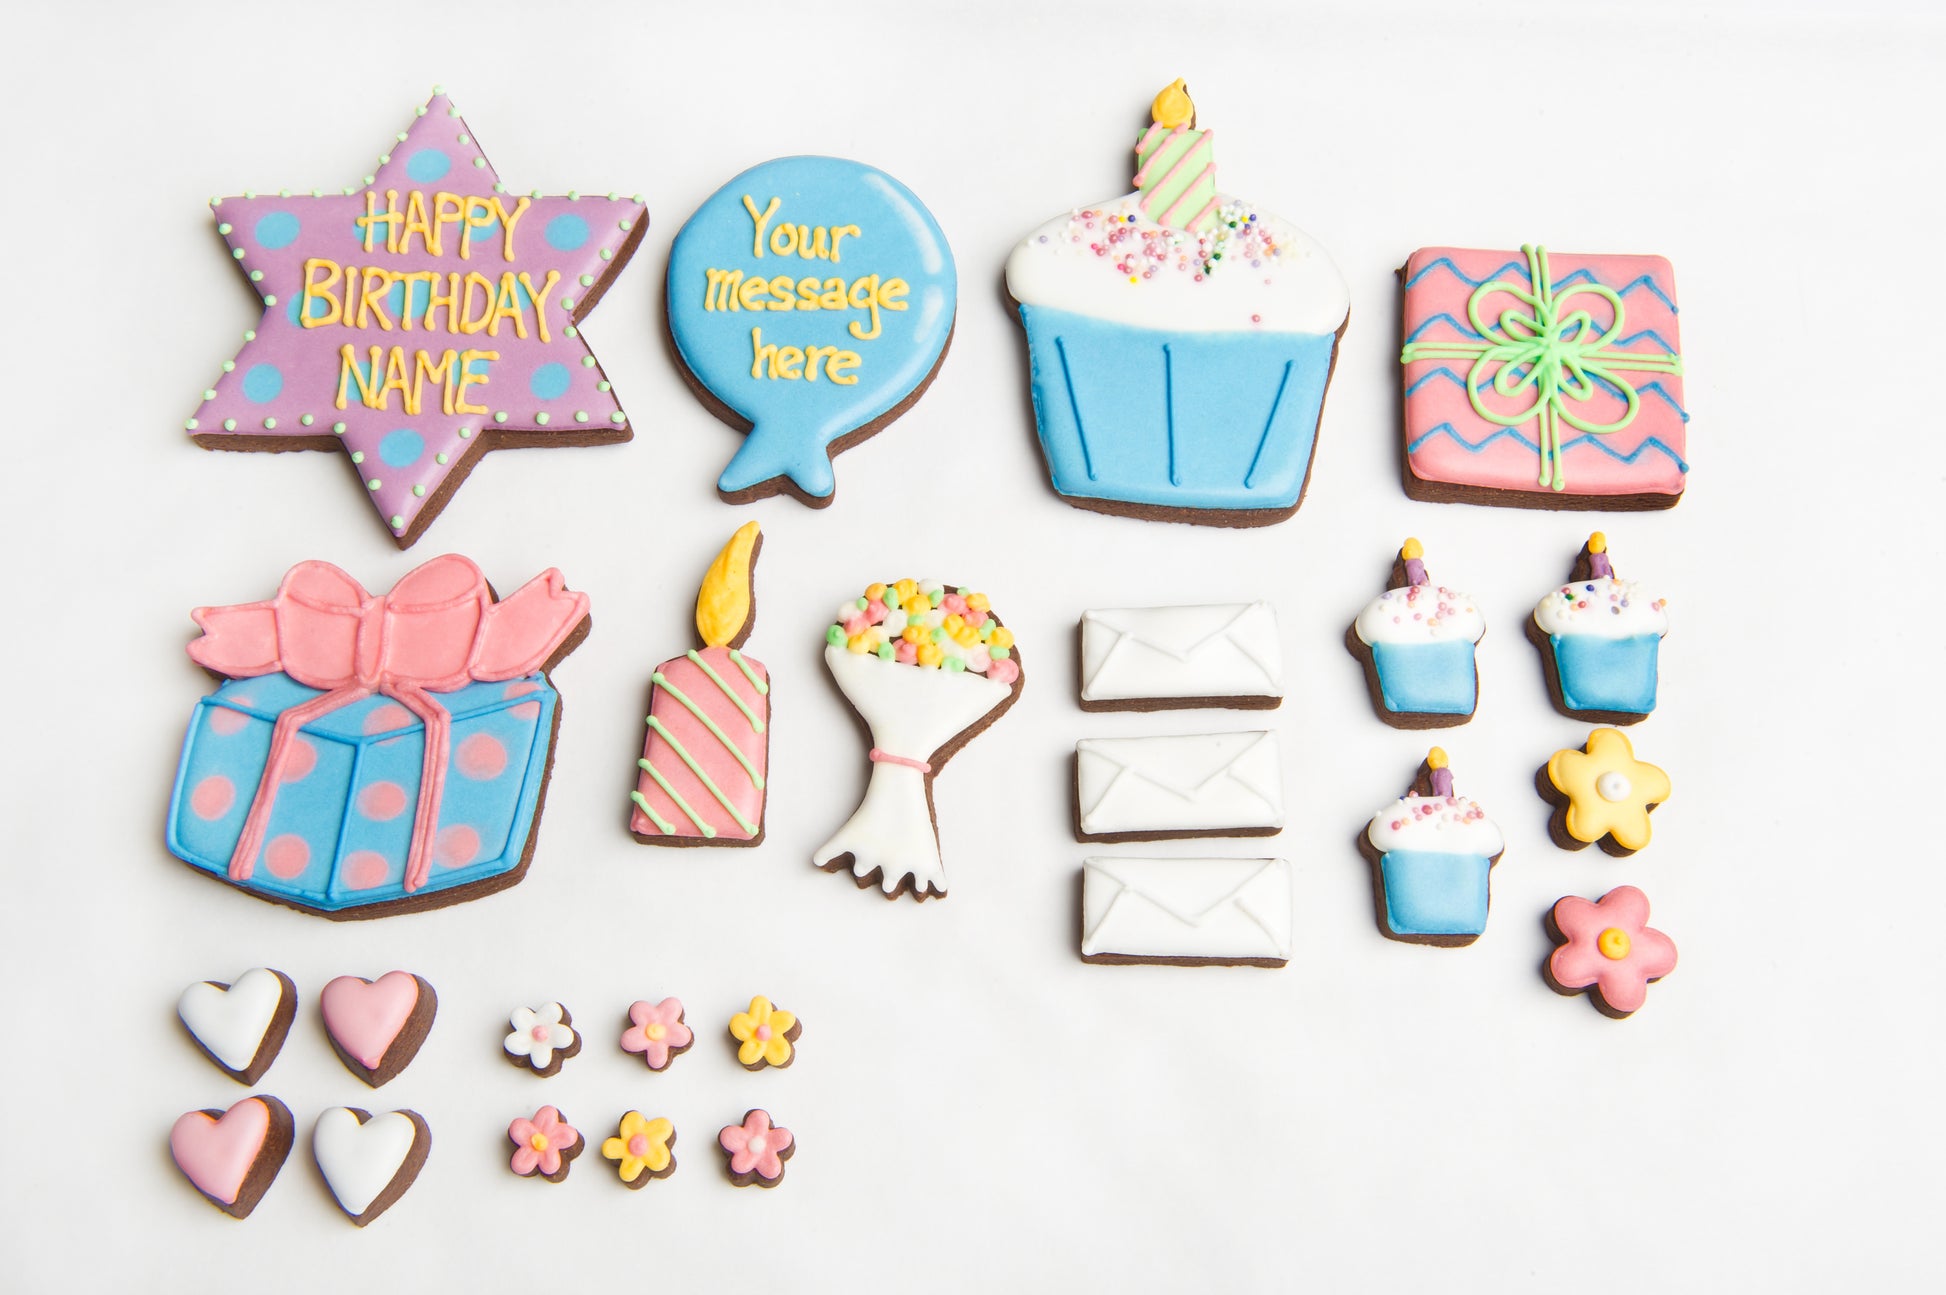 layout of the birthday biscuits. present cookie, balloon cookie, cupcake cookie.